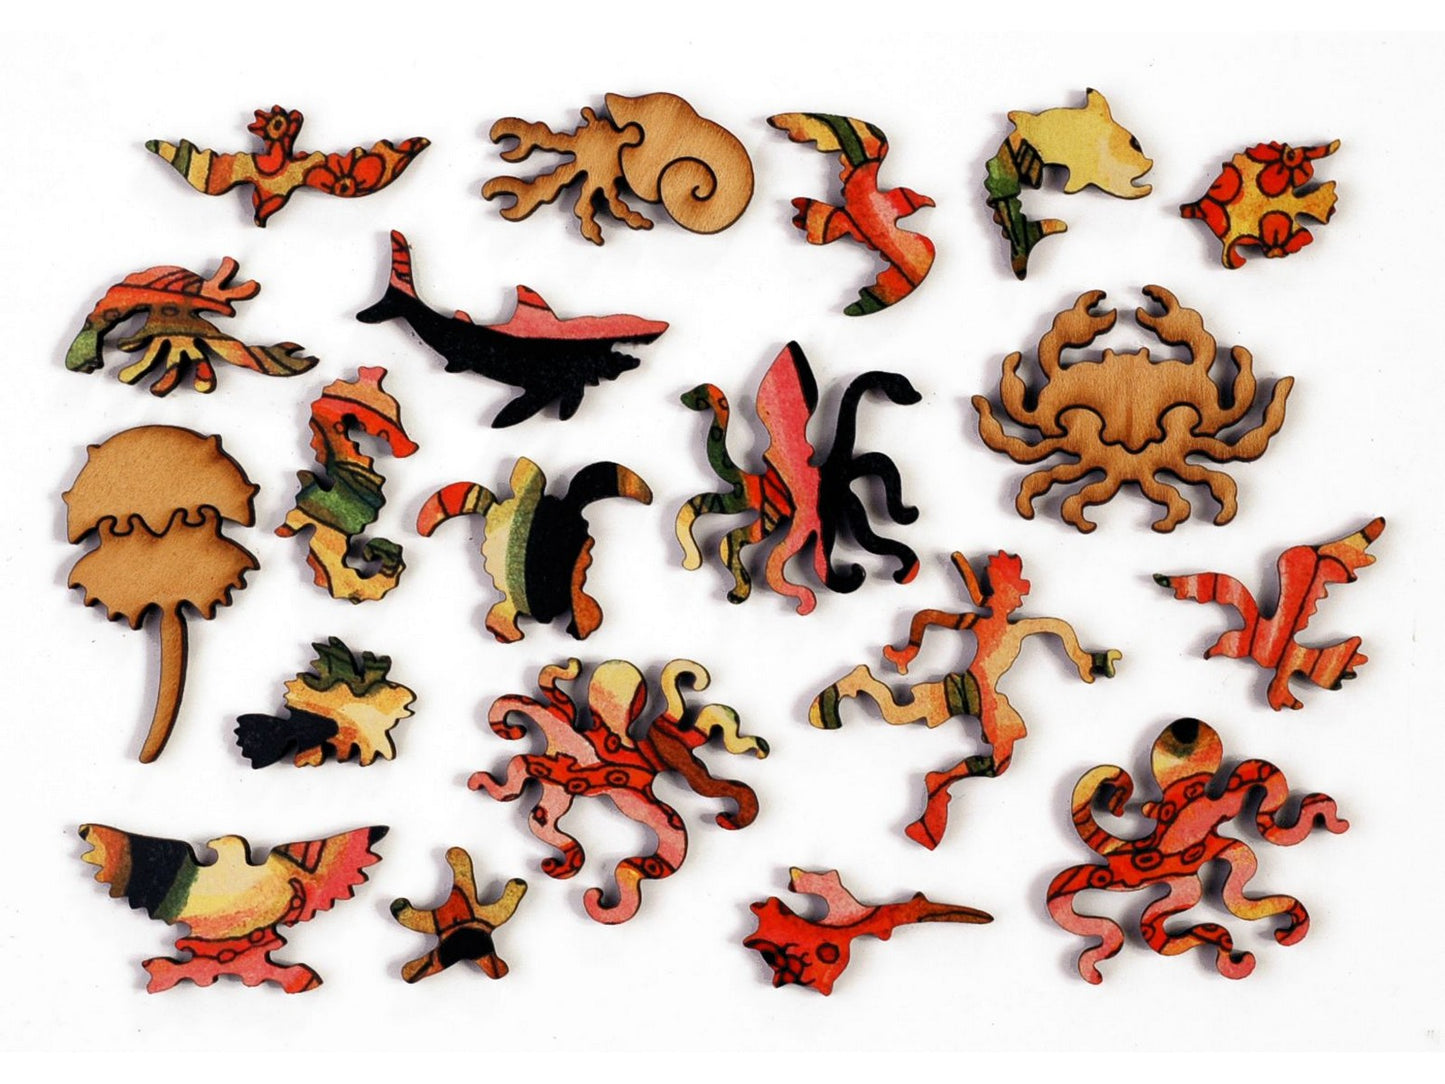 The whimsy pieces that can be found in the puzzle, Crab.